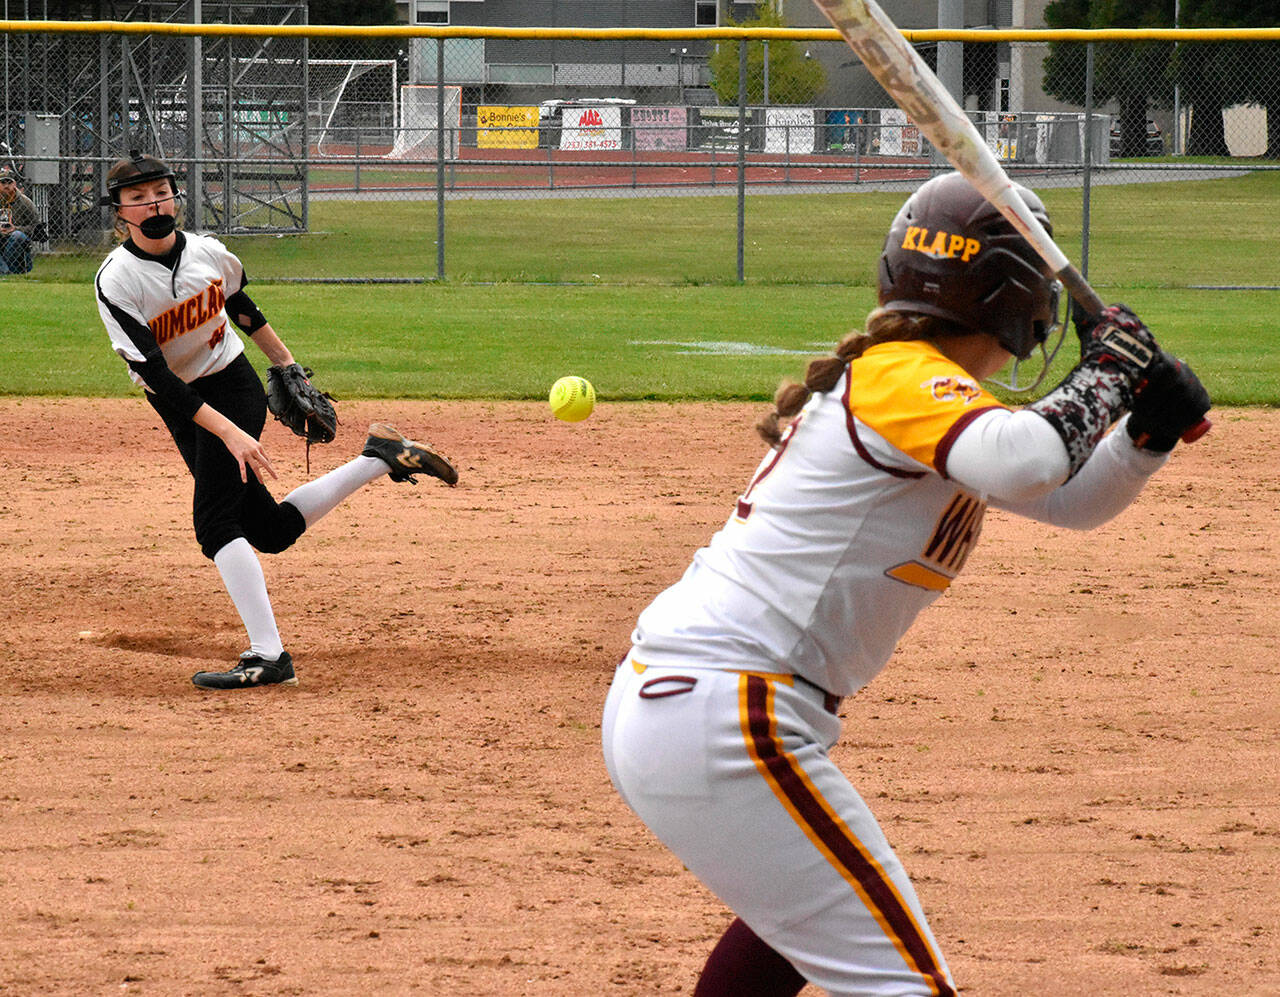 The SPSL 2A fastpitch season is now in the books, with postseason play set to begin begin this week. Plateau rivals Enumclaw High and White River met twice last week, on May 11 at the Boise Creek Sixplex and two days later on the White River campus. In this Friday photo, Enumclaw starting pitcher Emilie Crimmins delivers to White River’s Megan Klapperich. Photo by Kevin Hanson